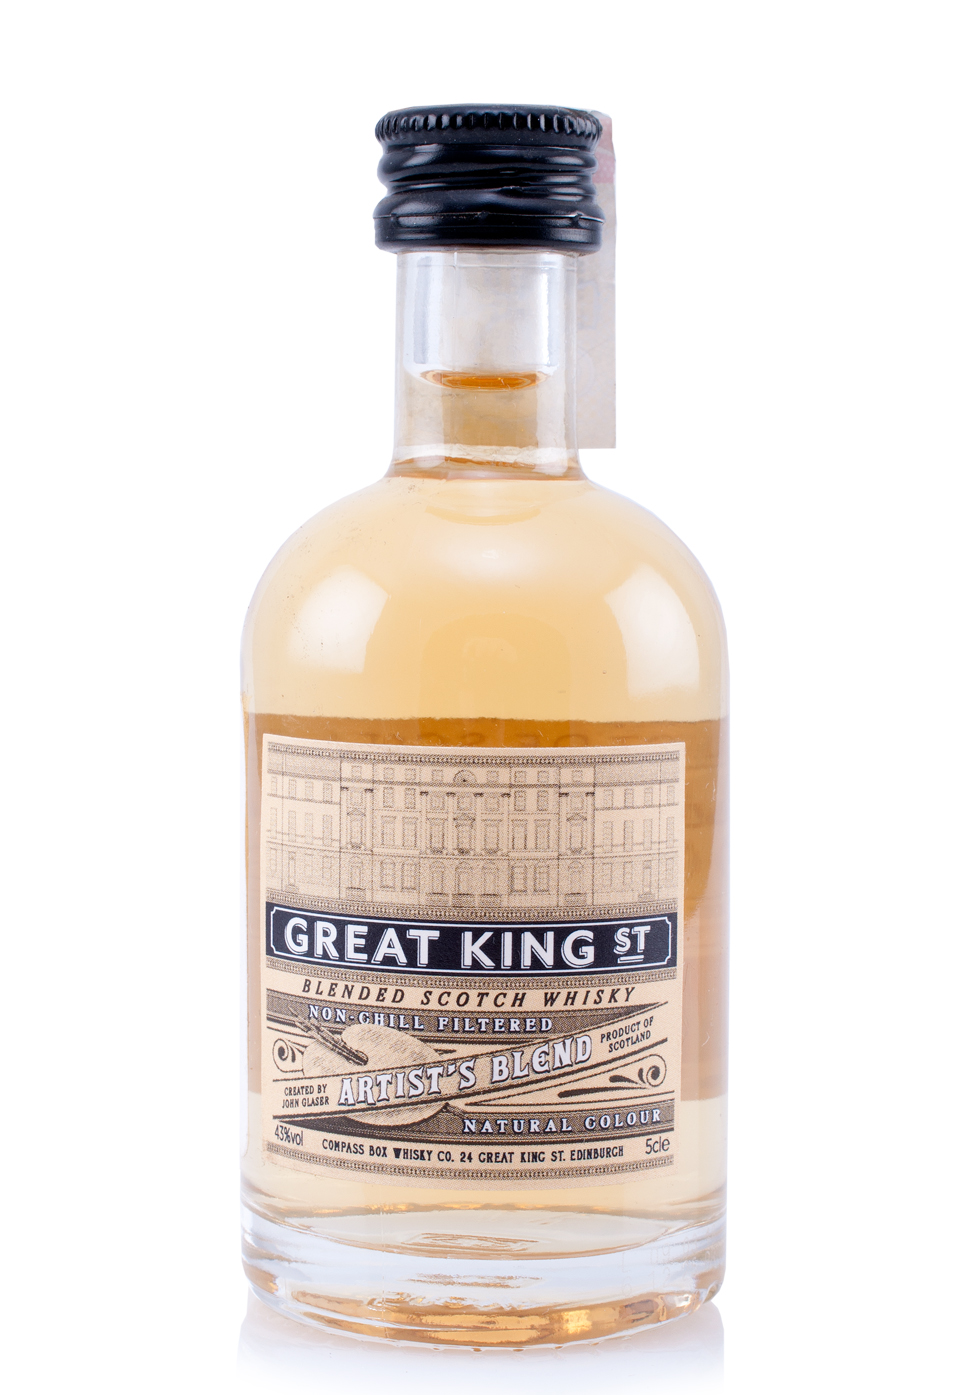 Whisky Great King Street by Compass Box, Artist's Blend (0.05L)